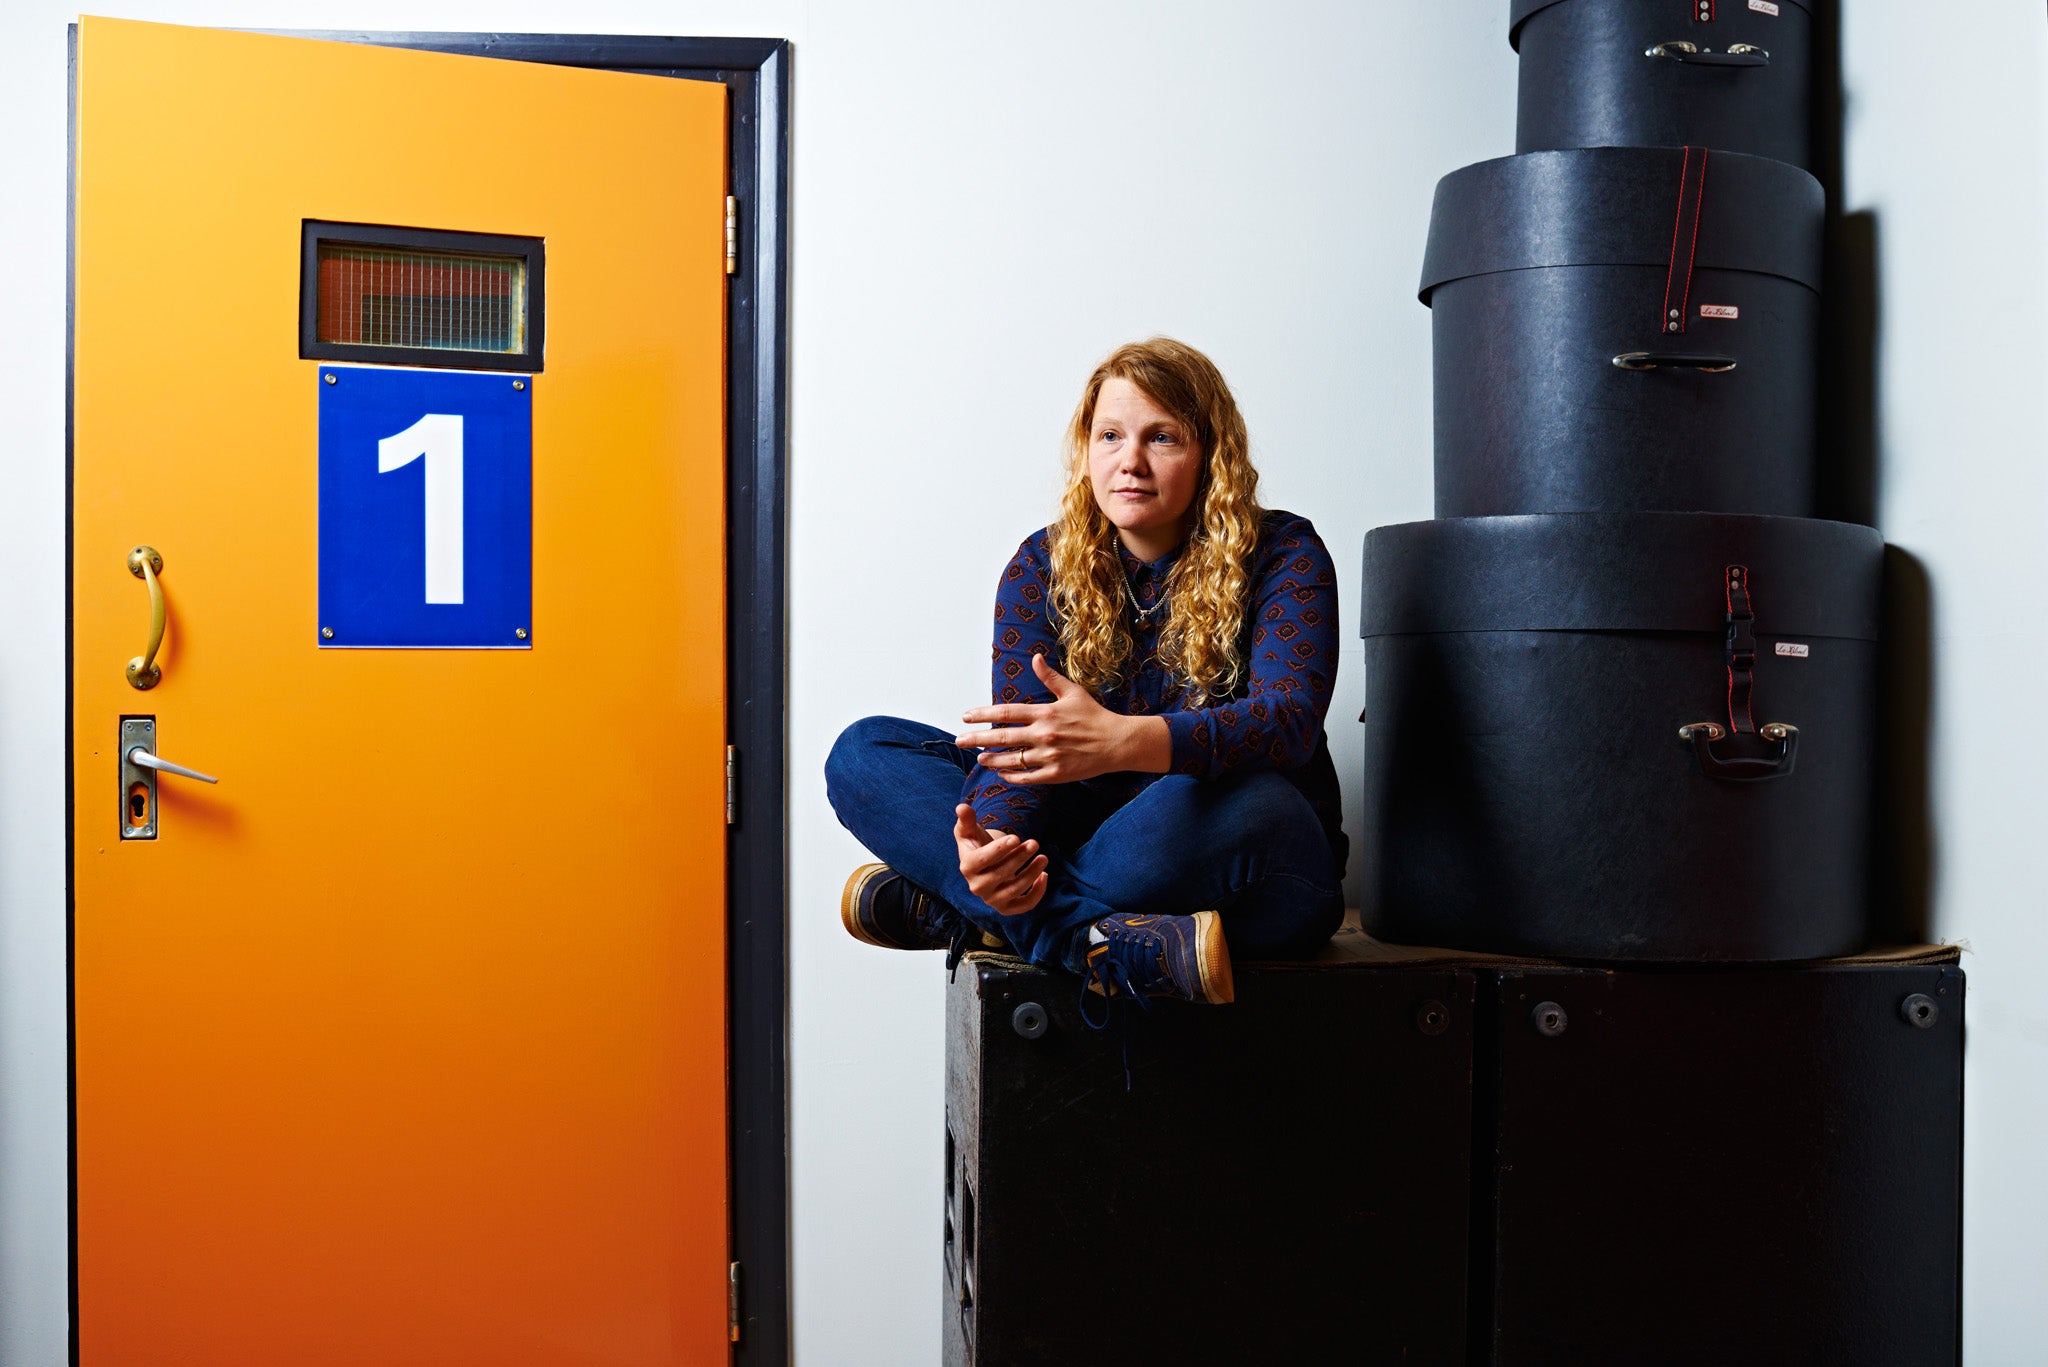 Award-winning performance poet Kate Tempest is to release her first hip hop album